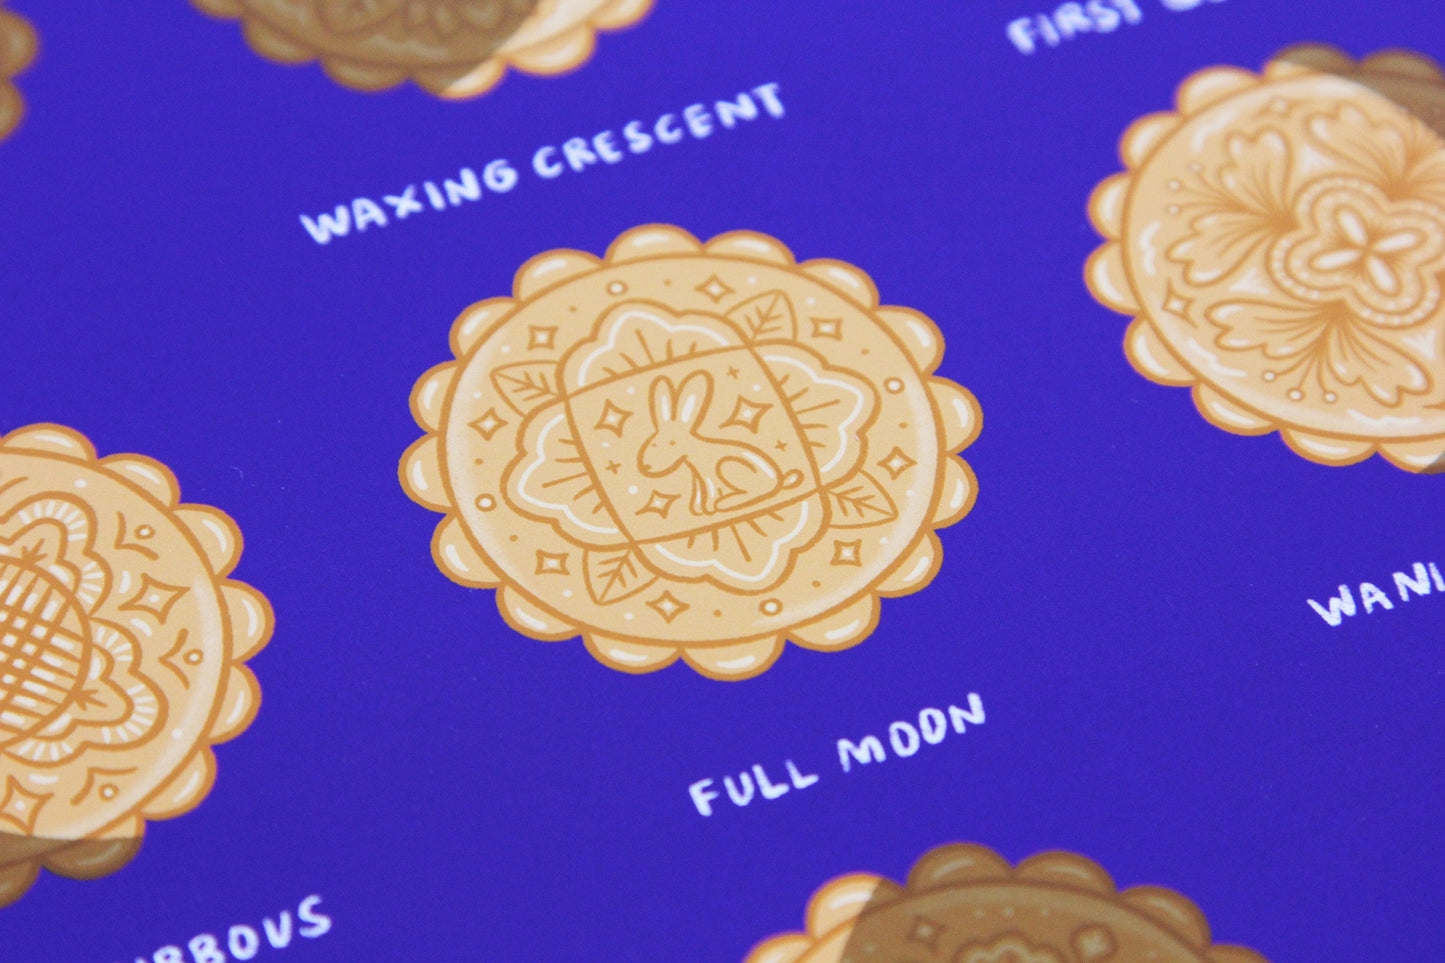 A close up of a JaneLi.Co print that says "Mooncake Phases" with 9 different illustrations of mooncakes in the different moon cycle phases.